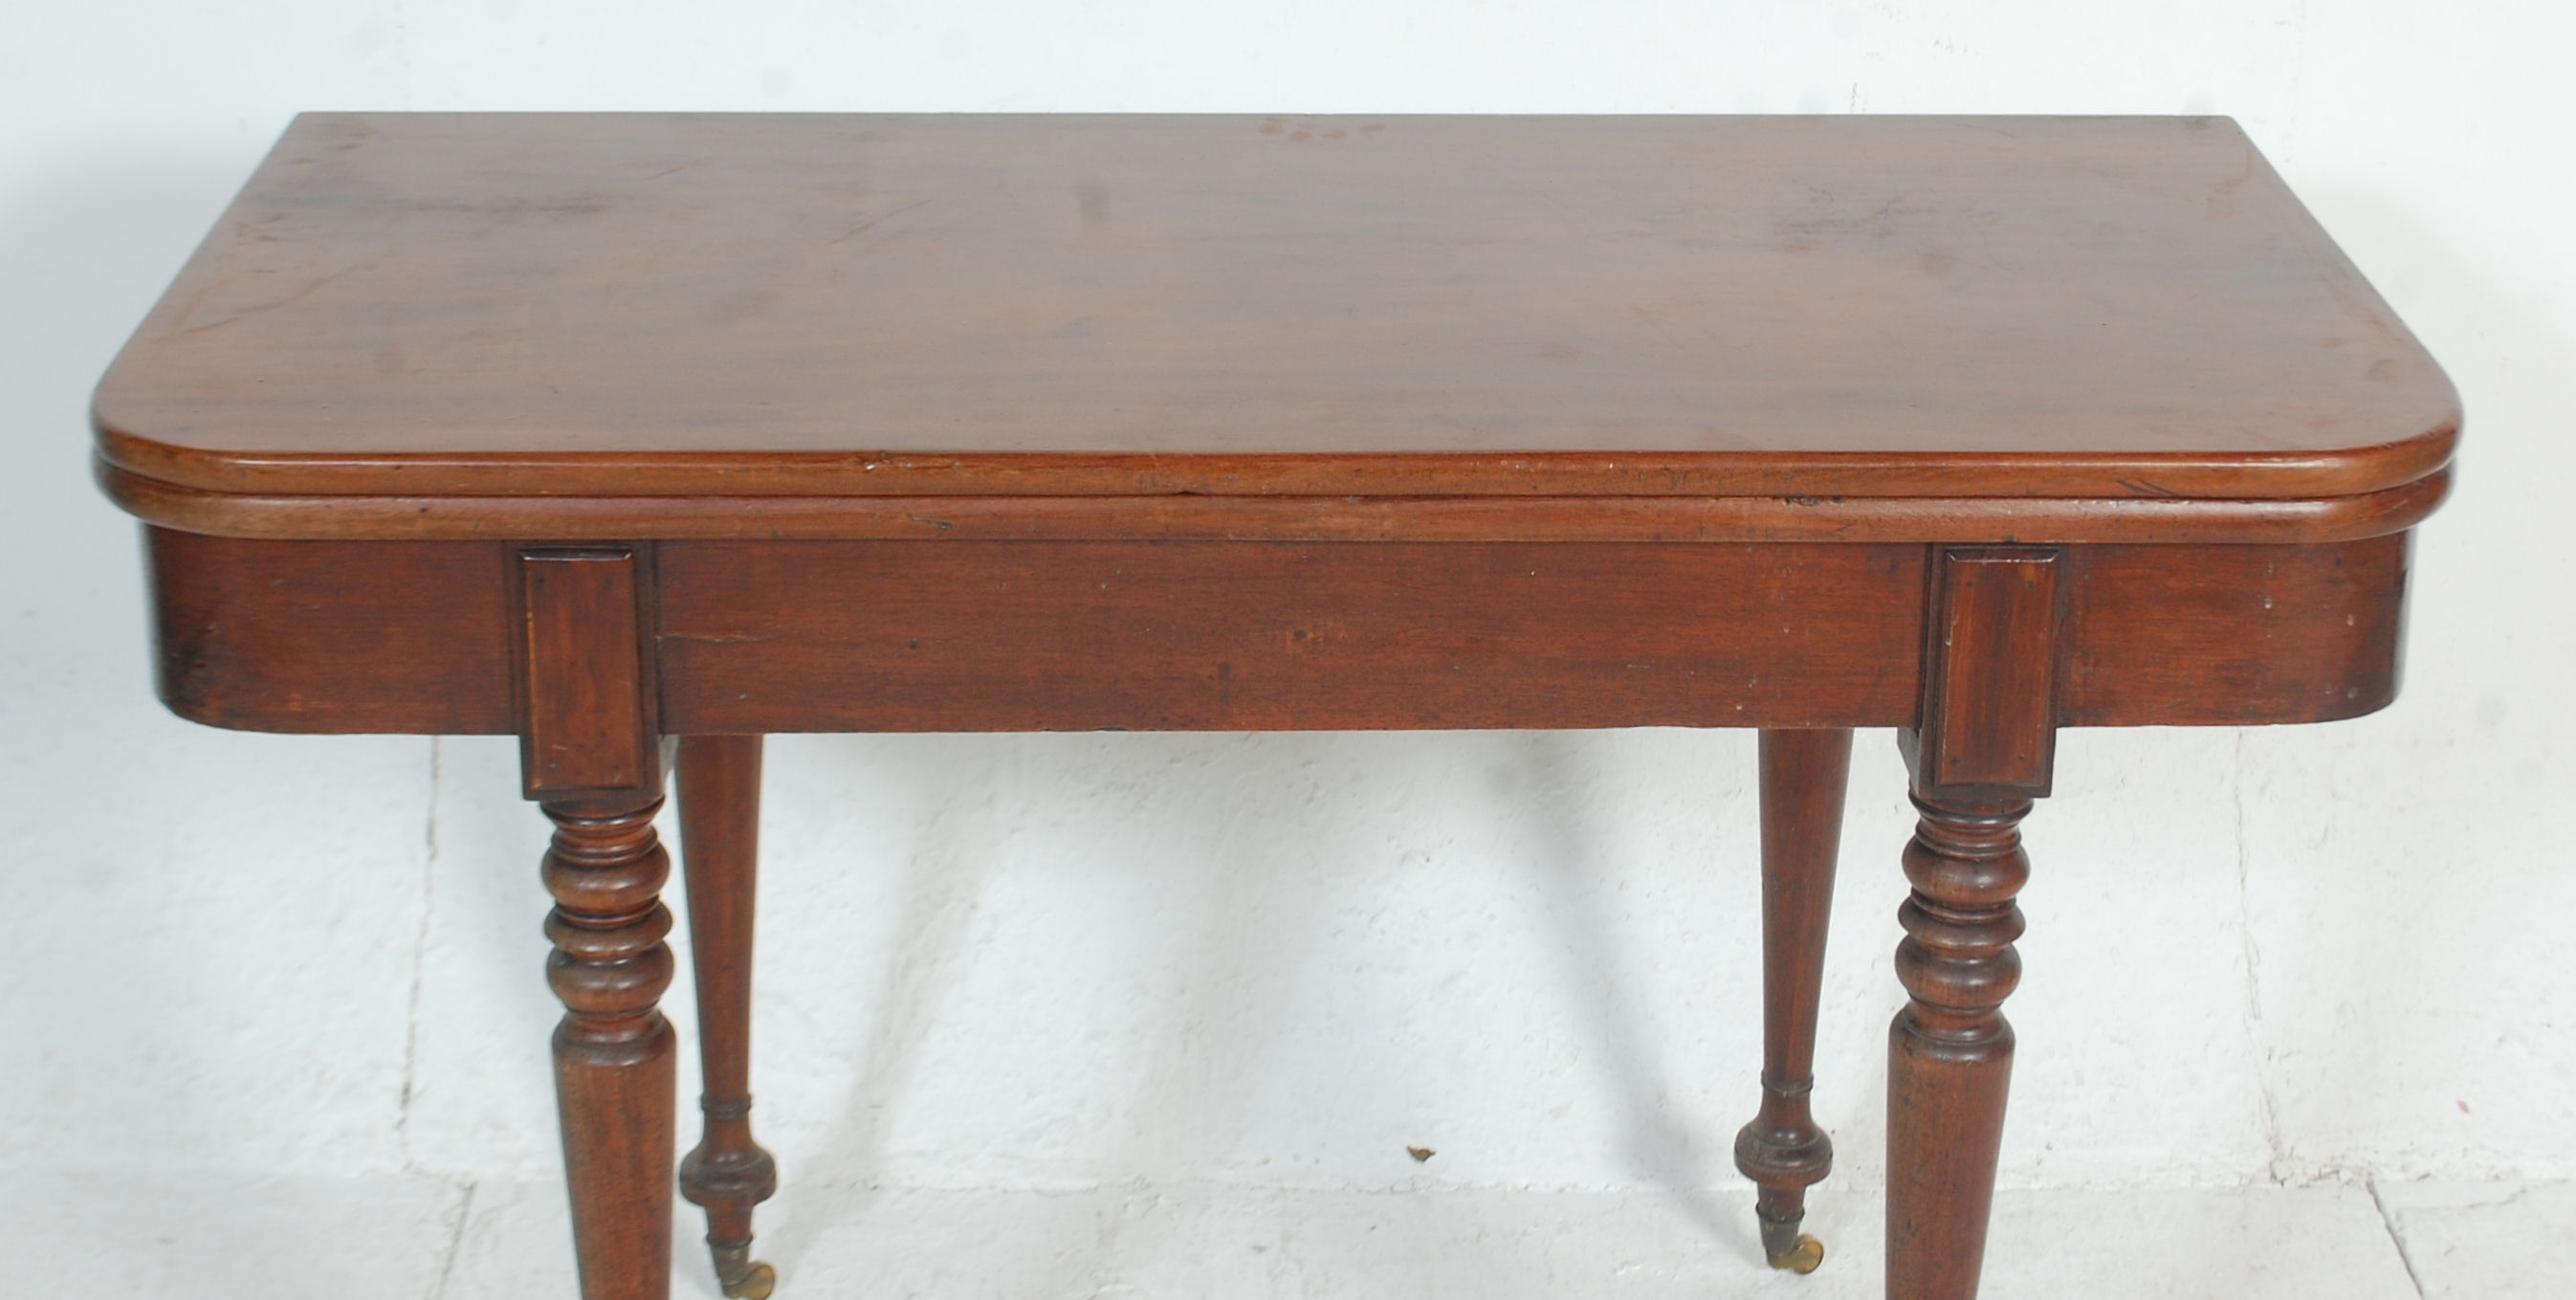 A 19th Century mahogany card / tea table having a folding and revolving top with brass fittings - Image 2 of 7